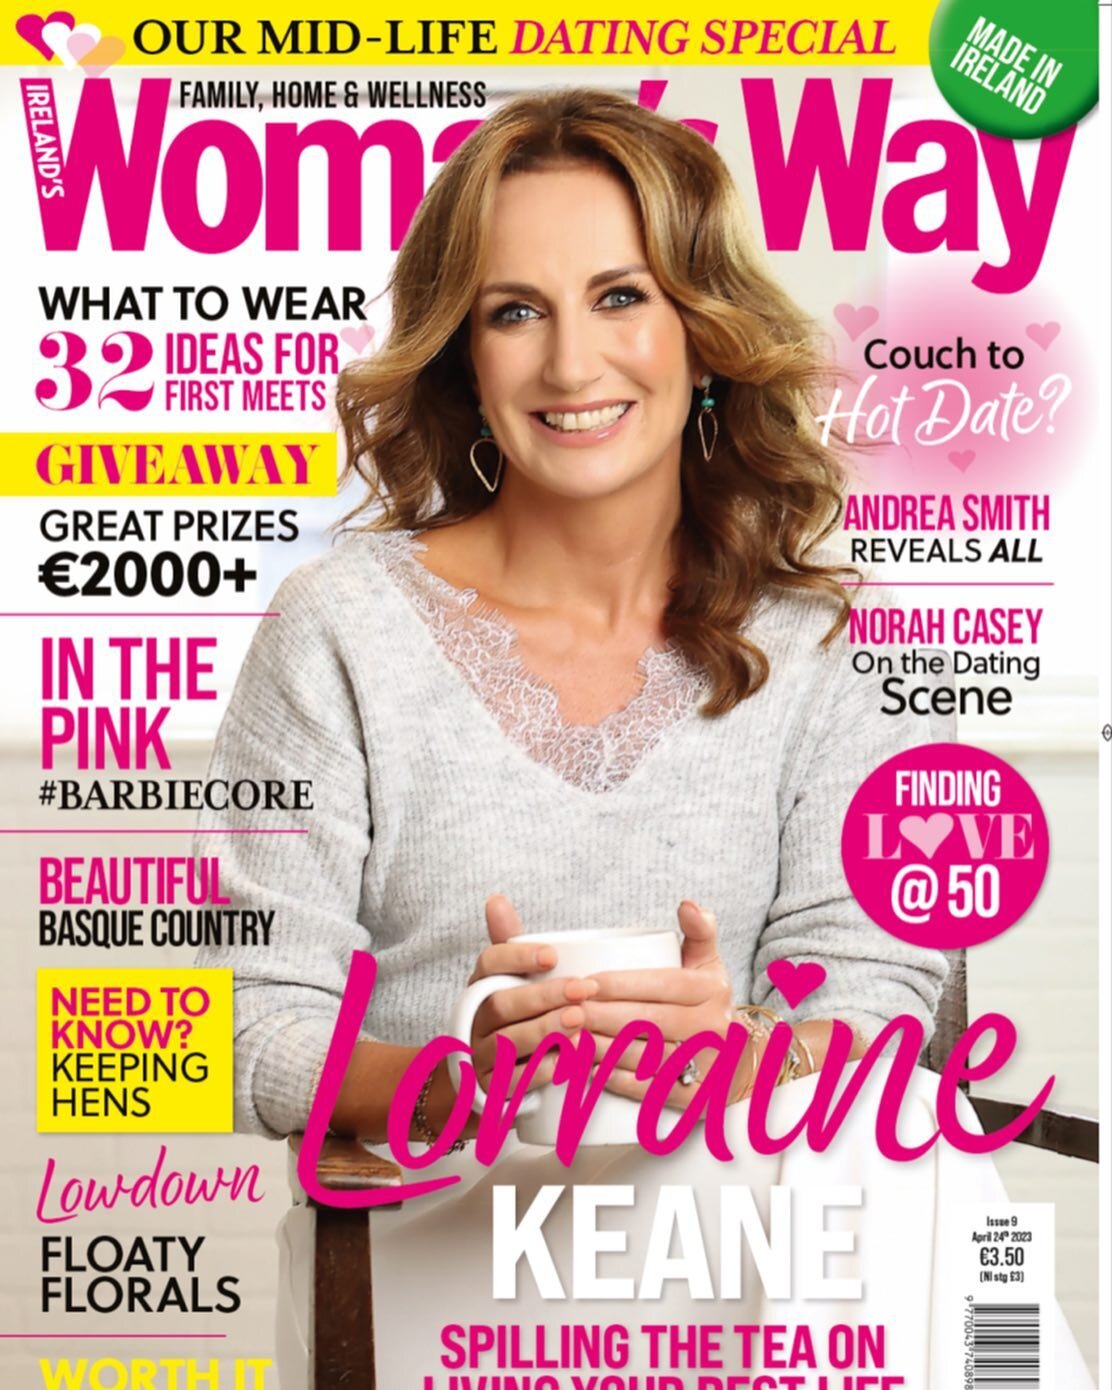 It&rsquo;s new issue day at Woman&rsquo;s Way and the lovely Lorraine Keane is on the cover.

It&rsquo;s our mid-life dating special and while we&rsquo;re firmly of the belief that many of us are very happy being single, we also know some of us are g